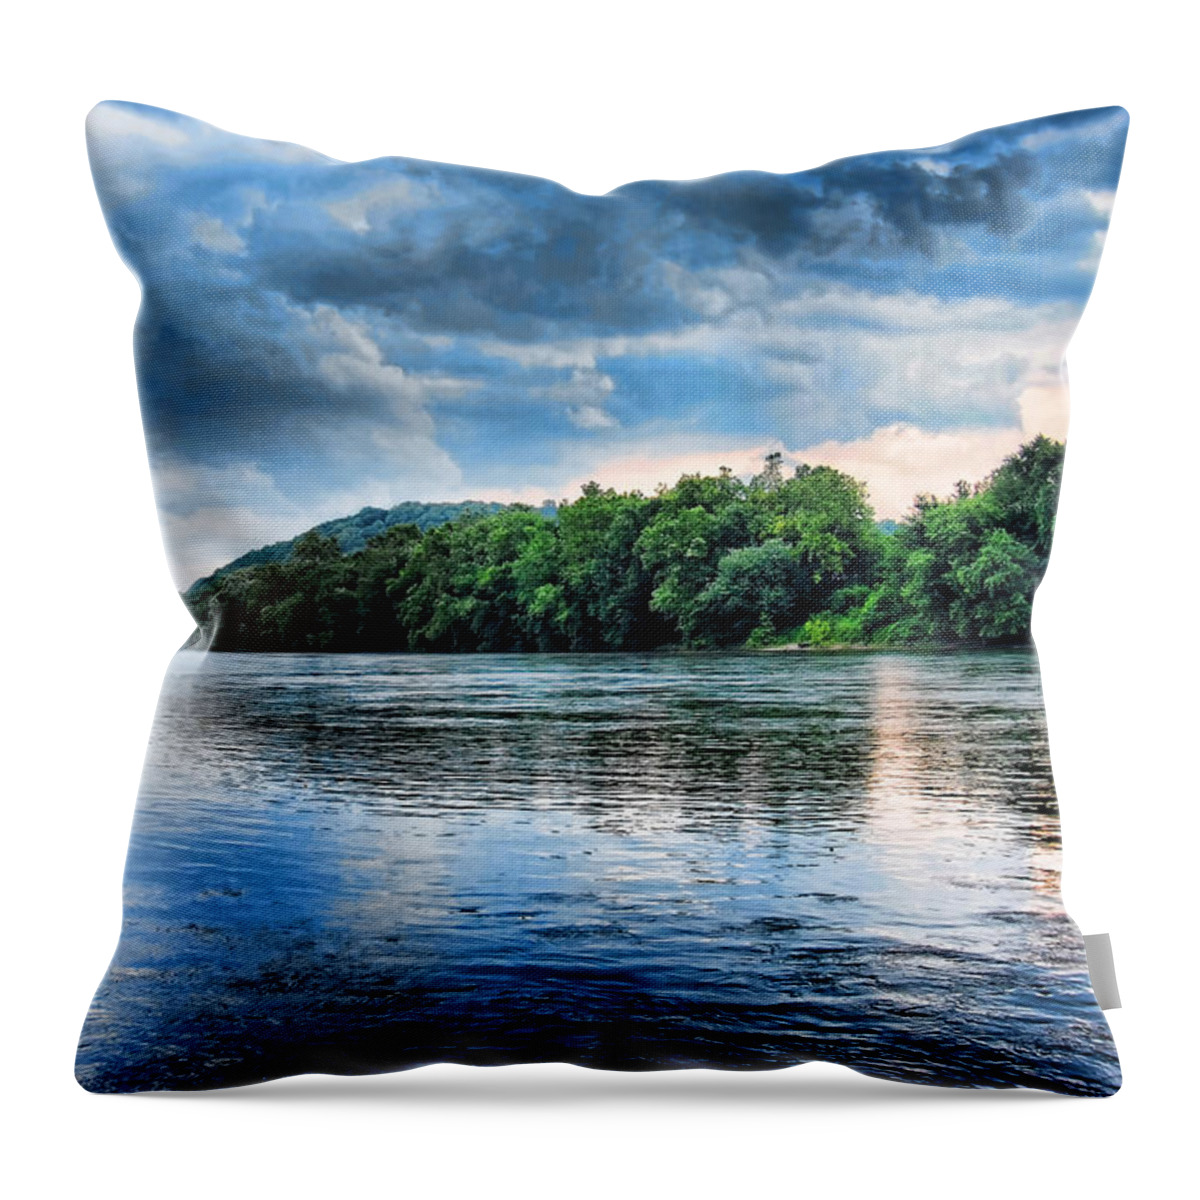 Delaware River Throw Pillow featuring the photograph Delaware River by Michael Dorn